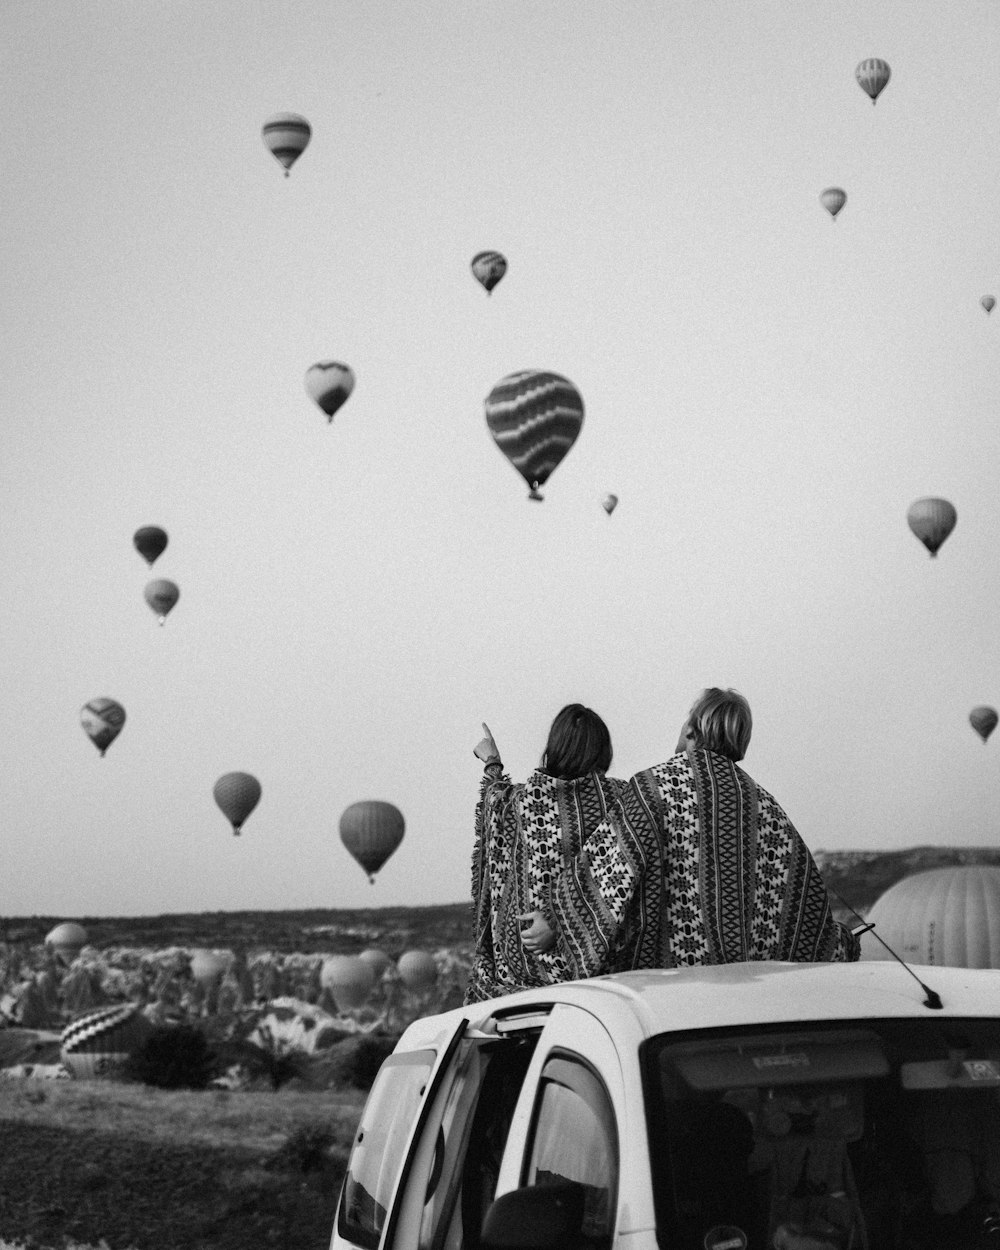 two people sitting on the roof of a car watching hot air balloons in the sky